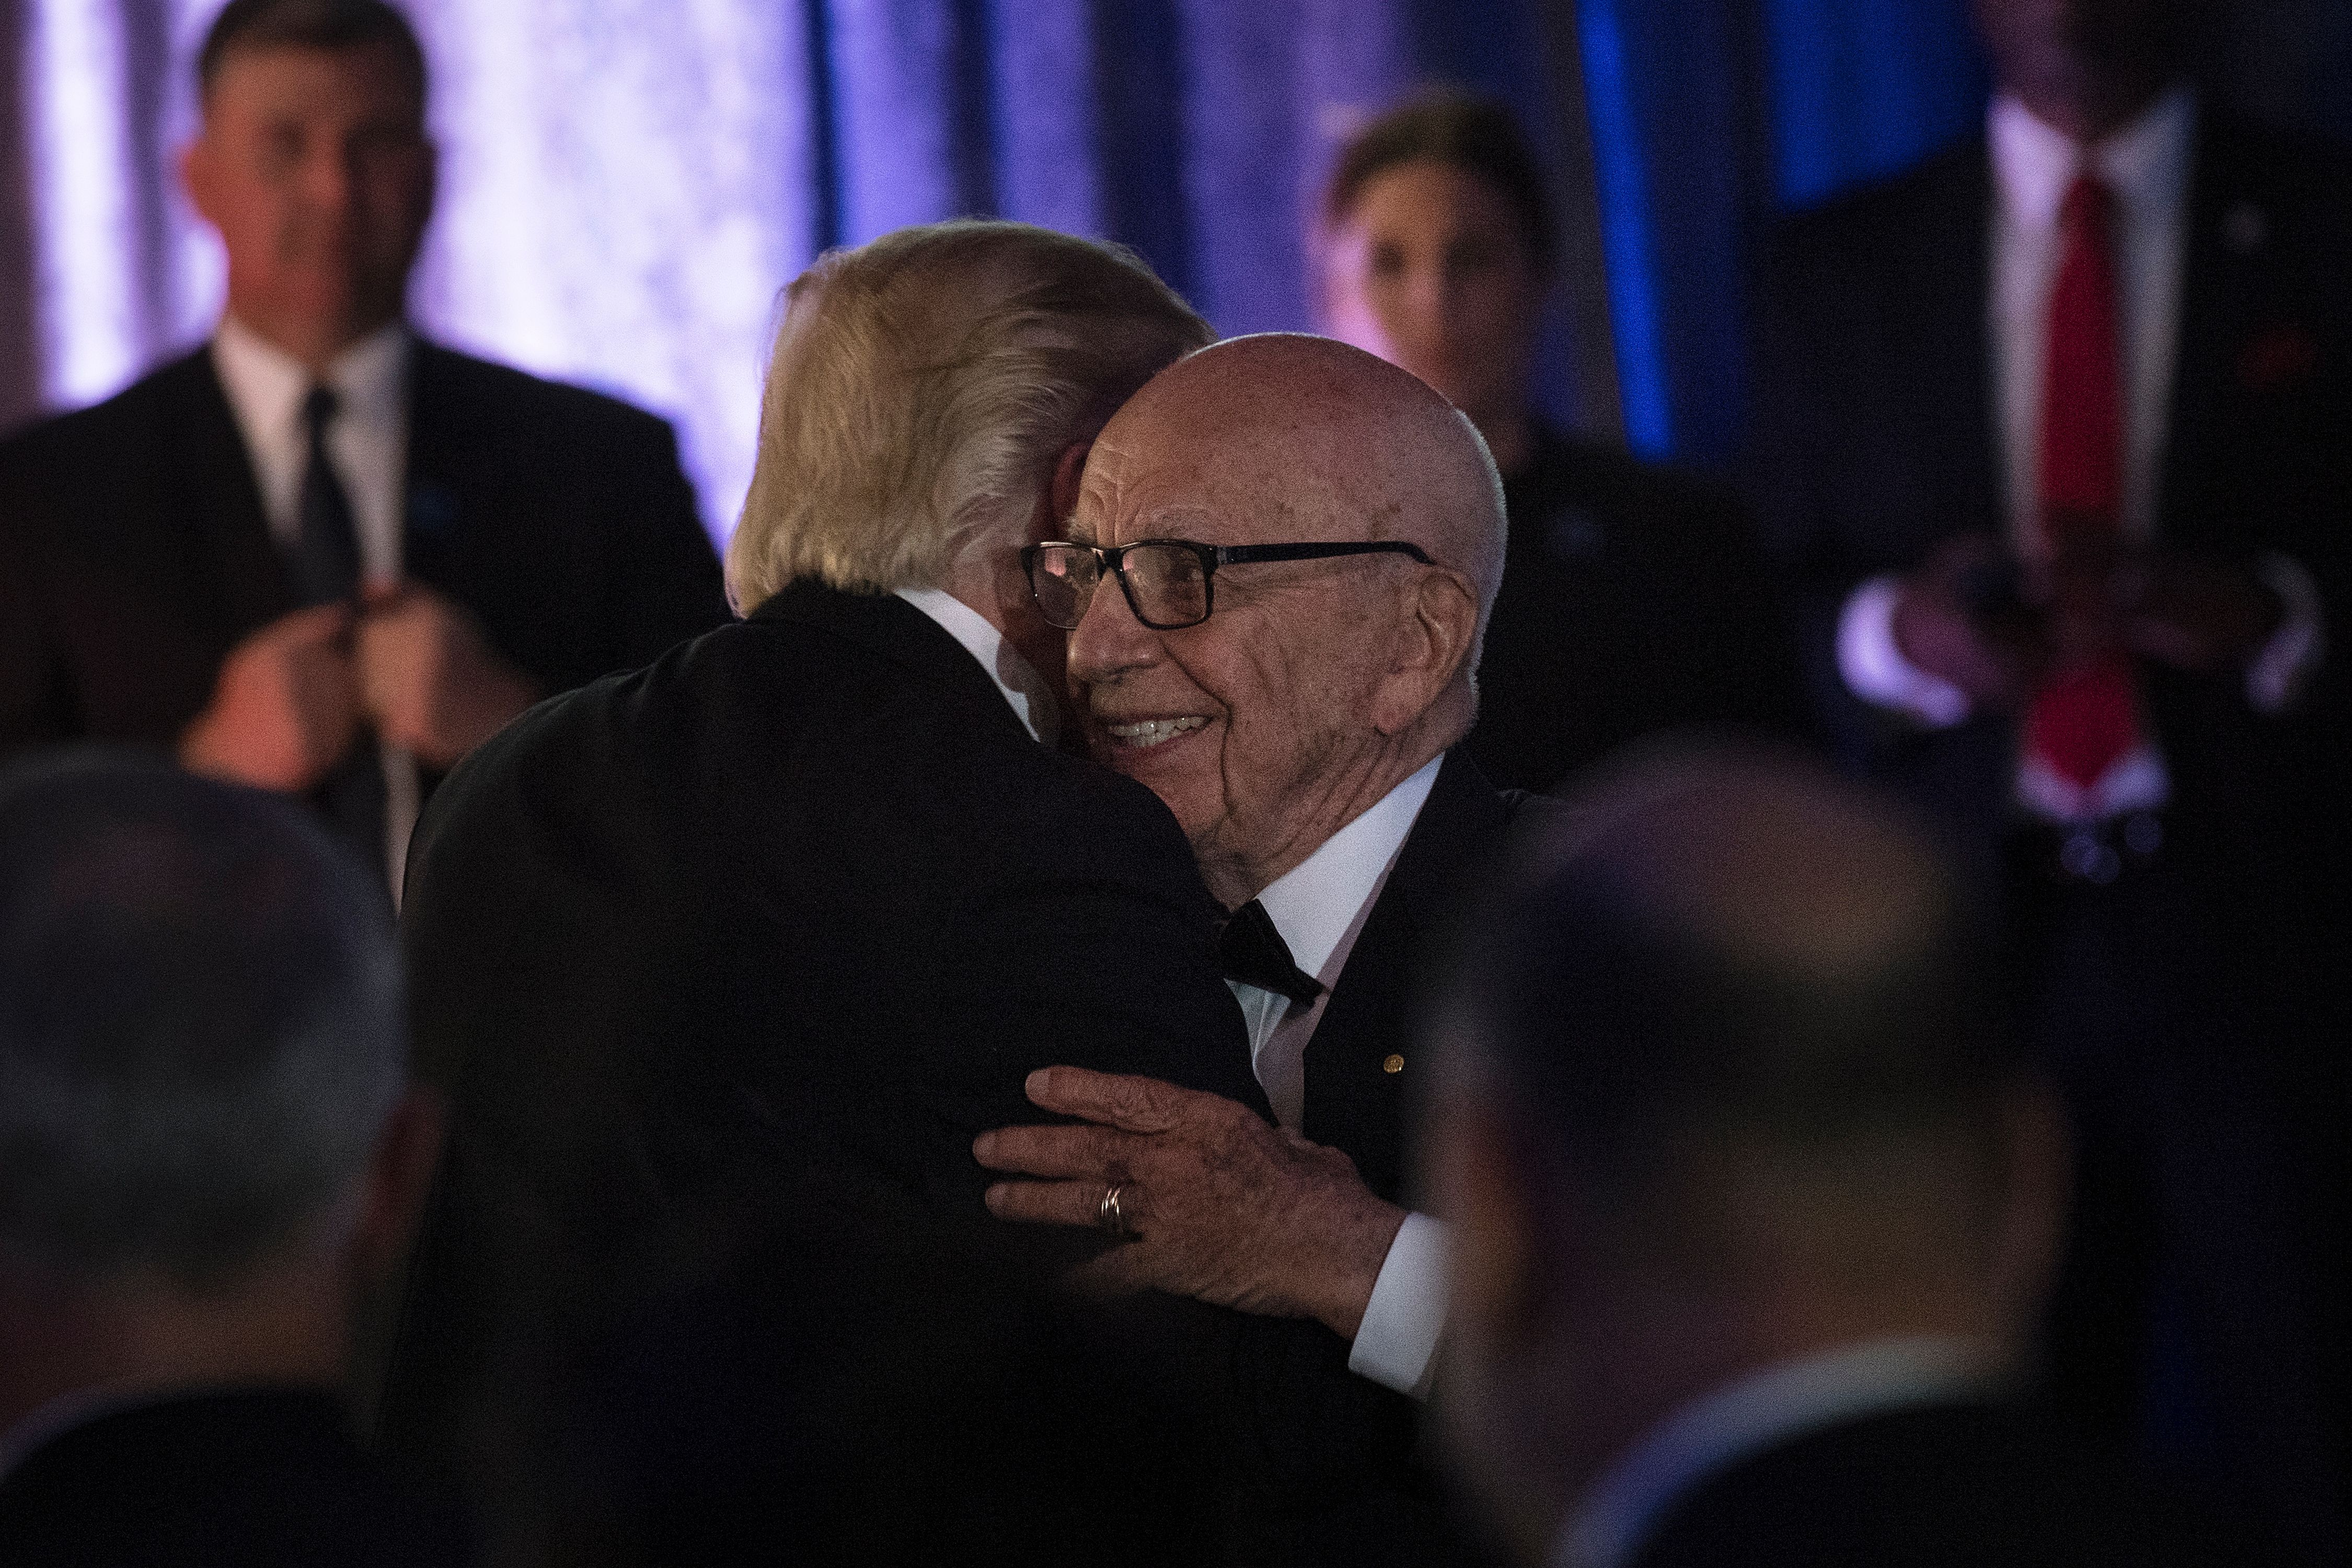 US President Donald Trump (L) is embraced by Rupert Murdoch, Executive Chairman of News Corp, during a dinner to commemorate the 75th anniversary of the Battle of the Coral Sea during WWII onboard the Intrepid Sea, Air and Space Museum May 4, 2017 in New York, New York.